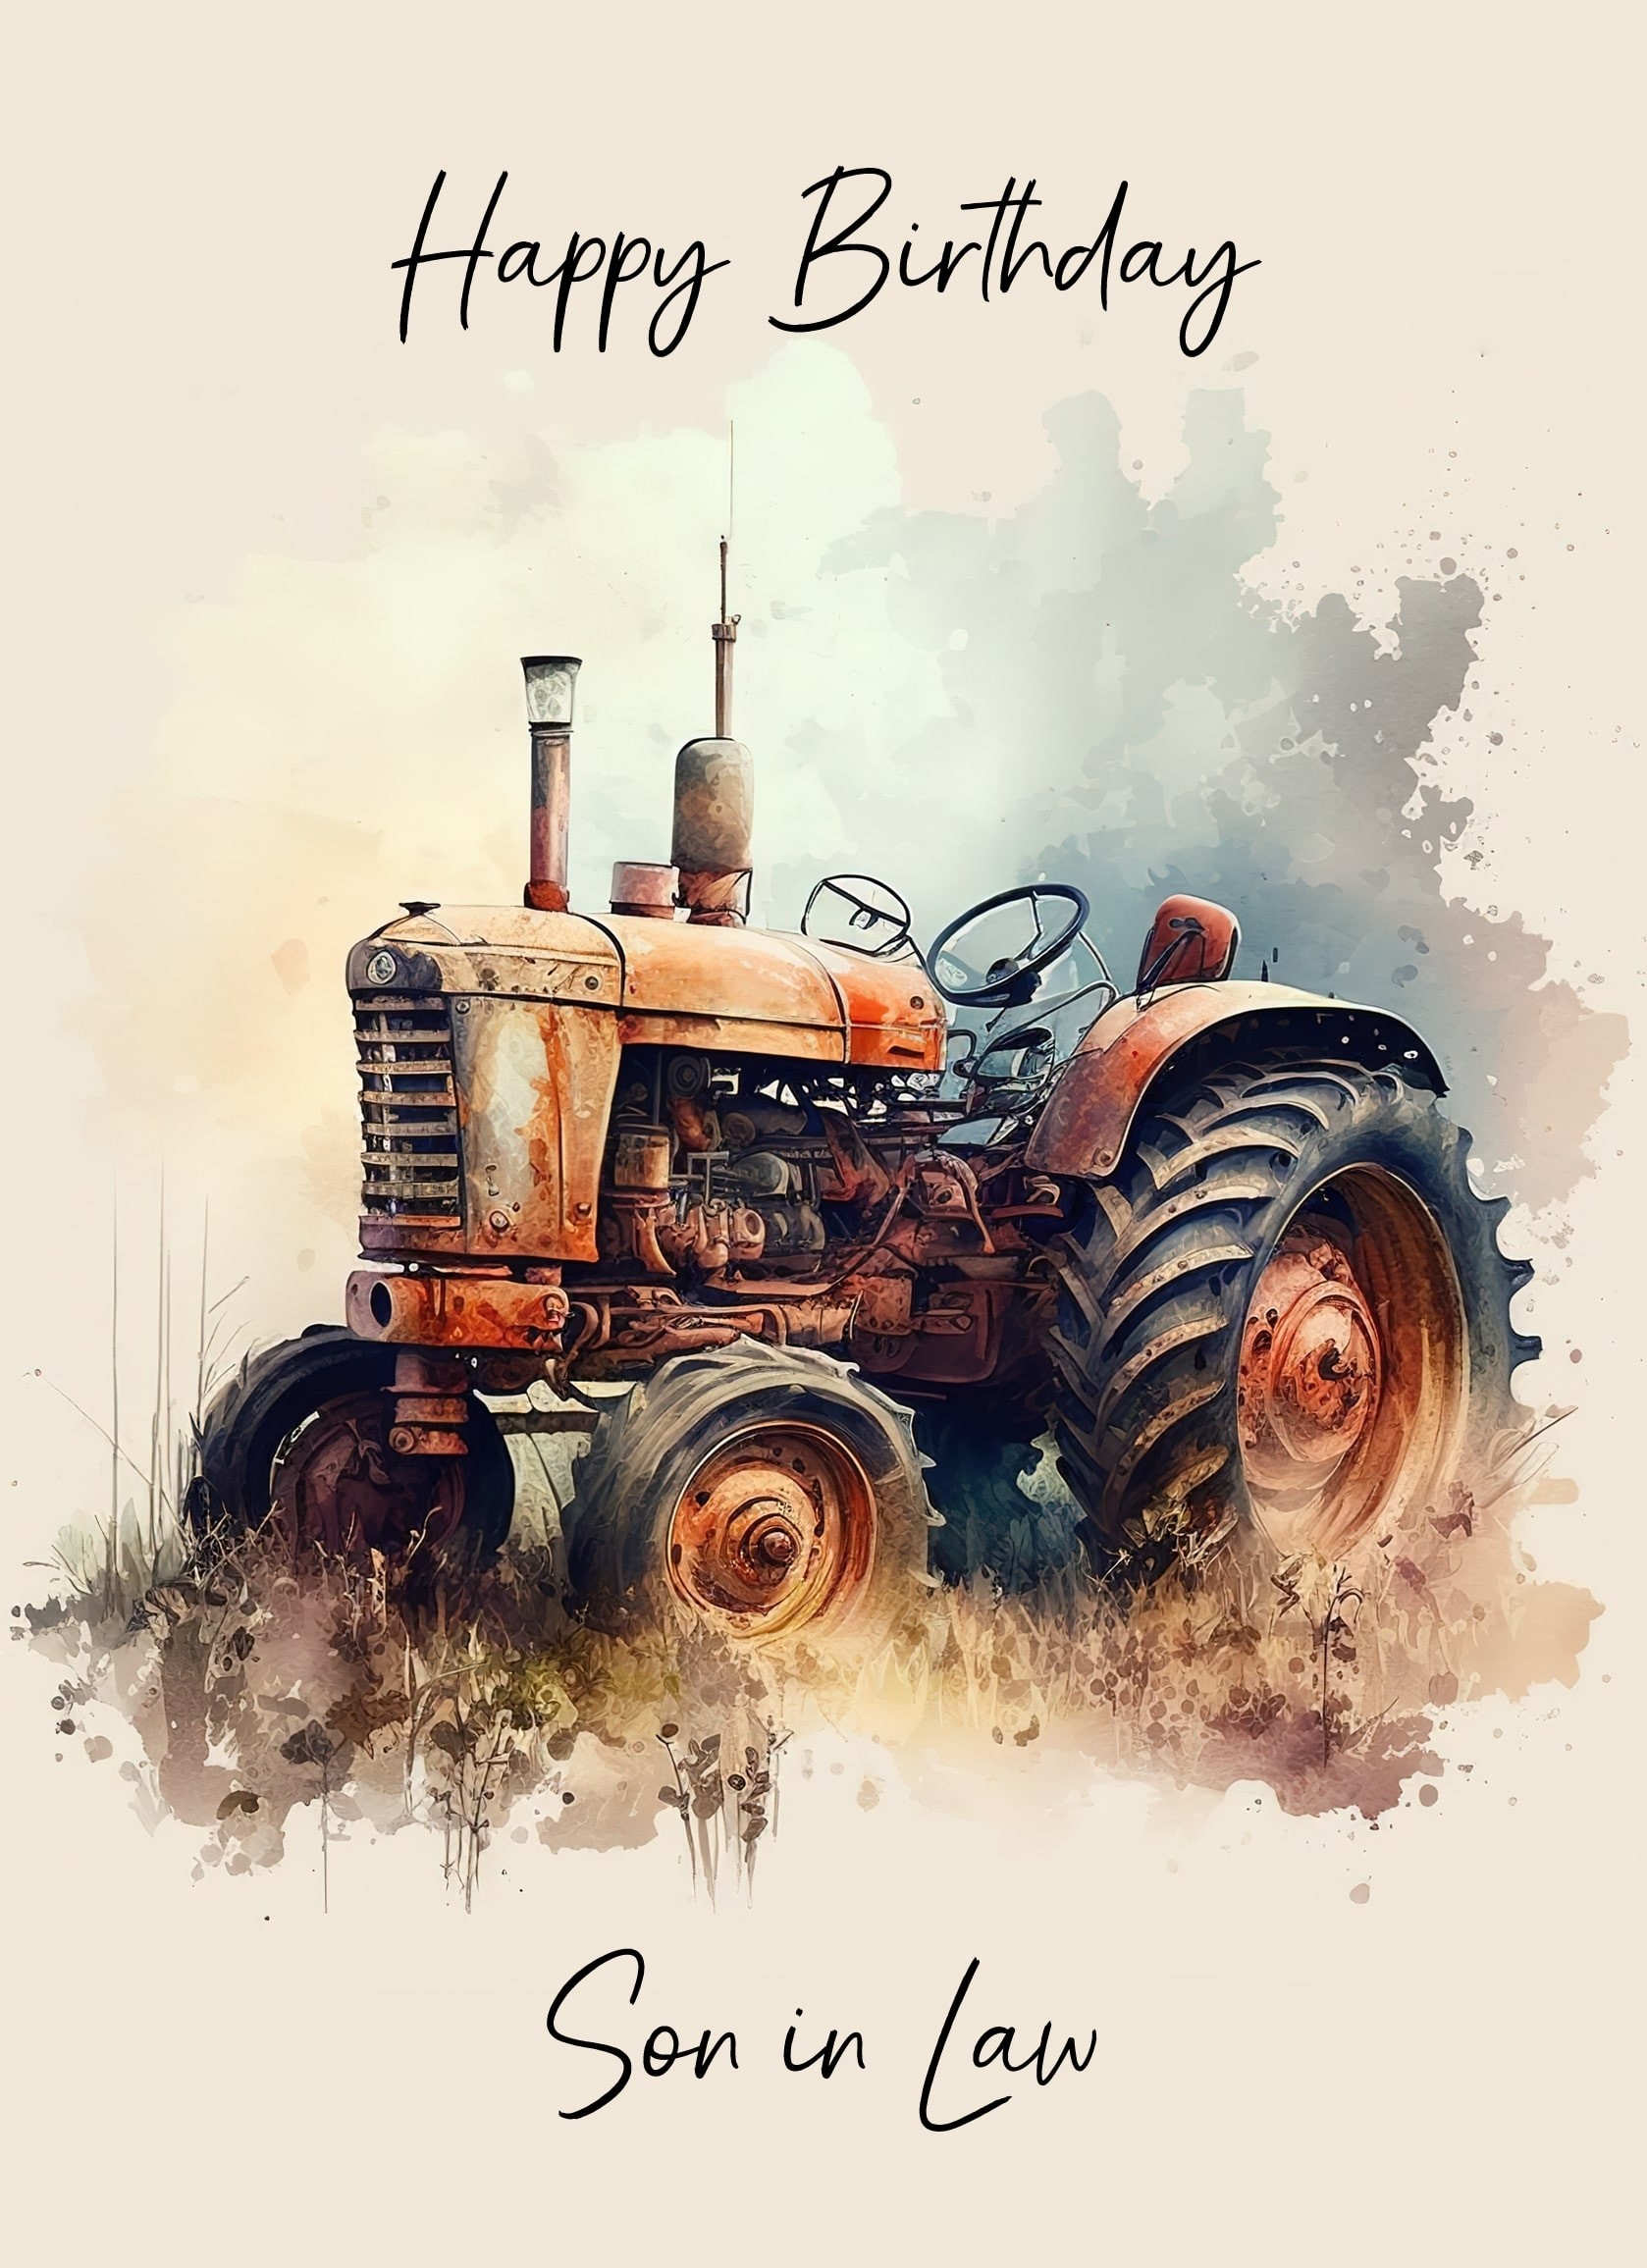 Tractor Birthday Card for Son in Law